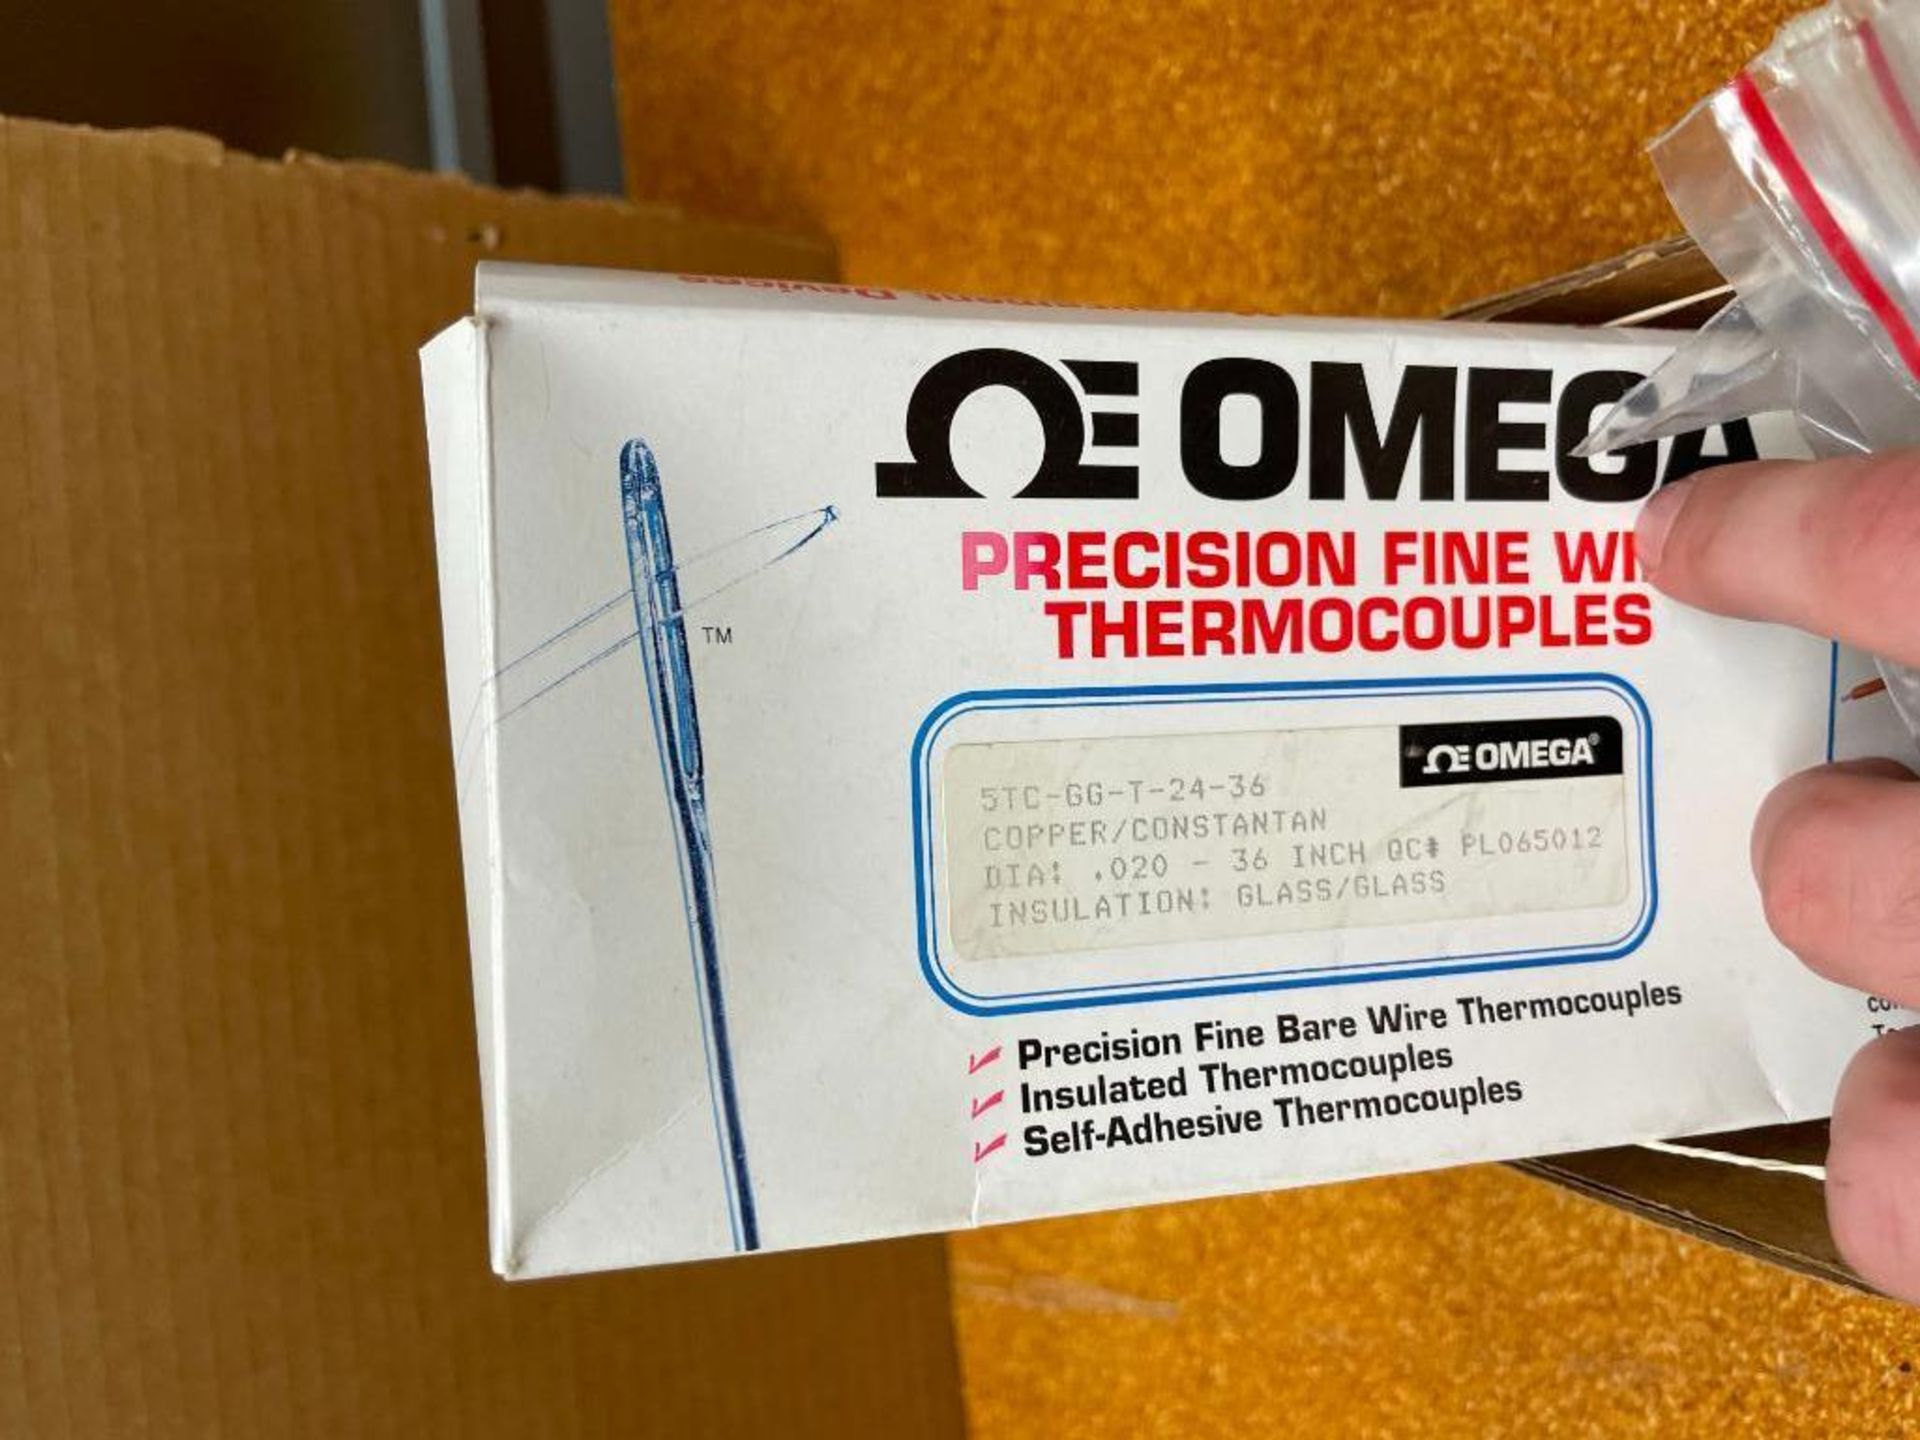 2-OMEGA COPPER/CONSTANTIN AND 5-MEDTERM WIRE THERMOCOUPLES QTY: 1 - Image 4 of 4